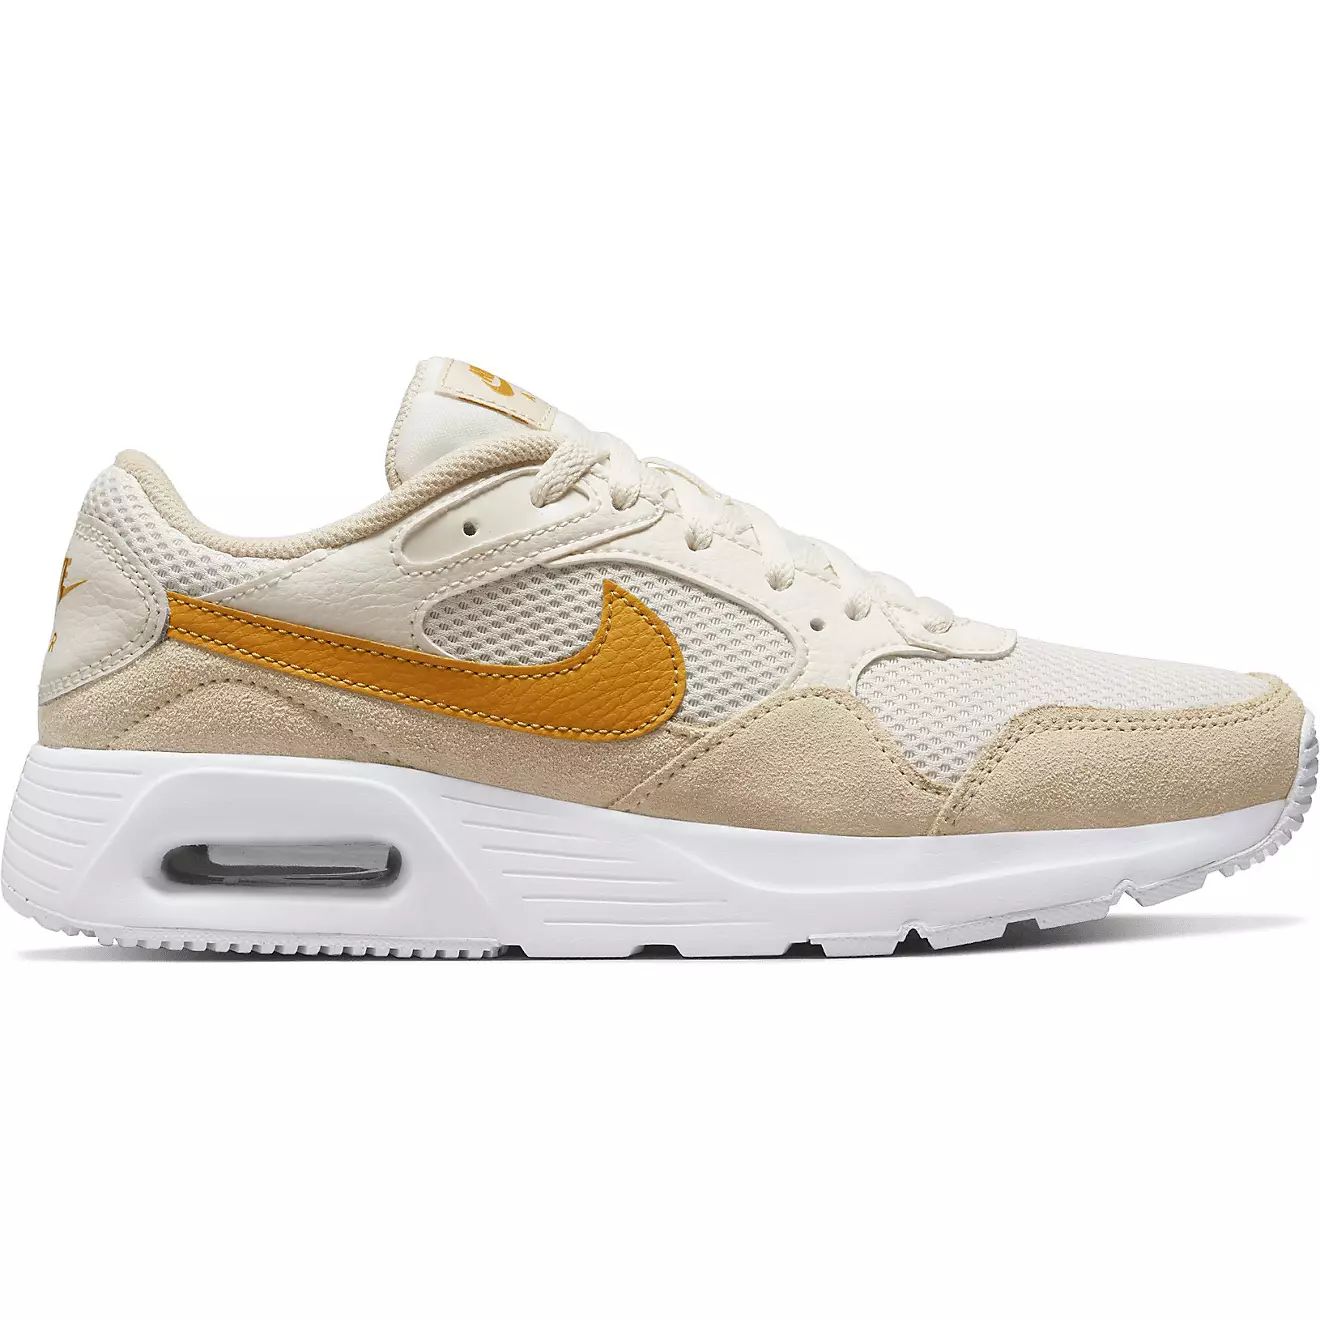 Nike Women's Air Max SC Running Shoes | Academy | Academy Sports + Outdoors